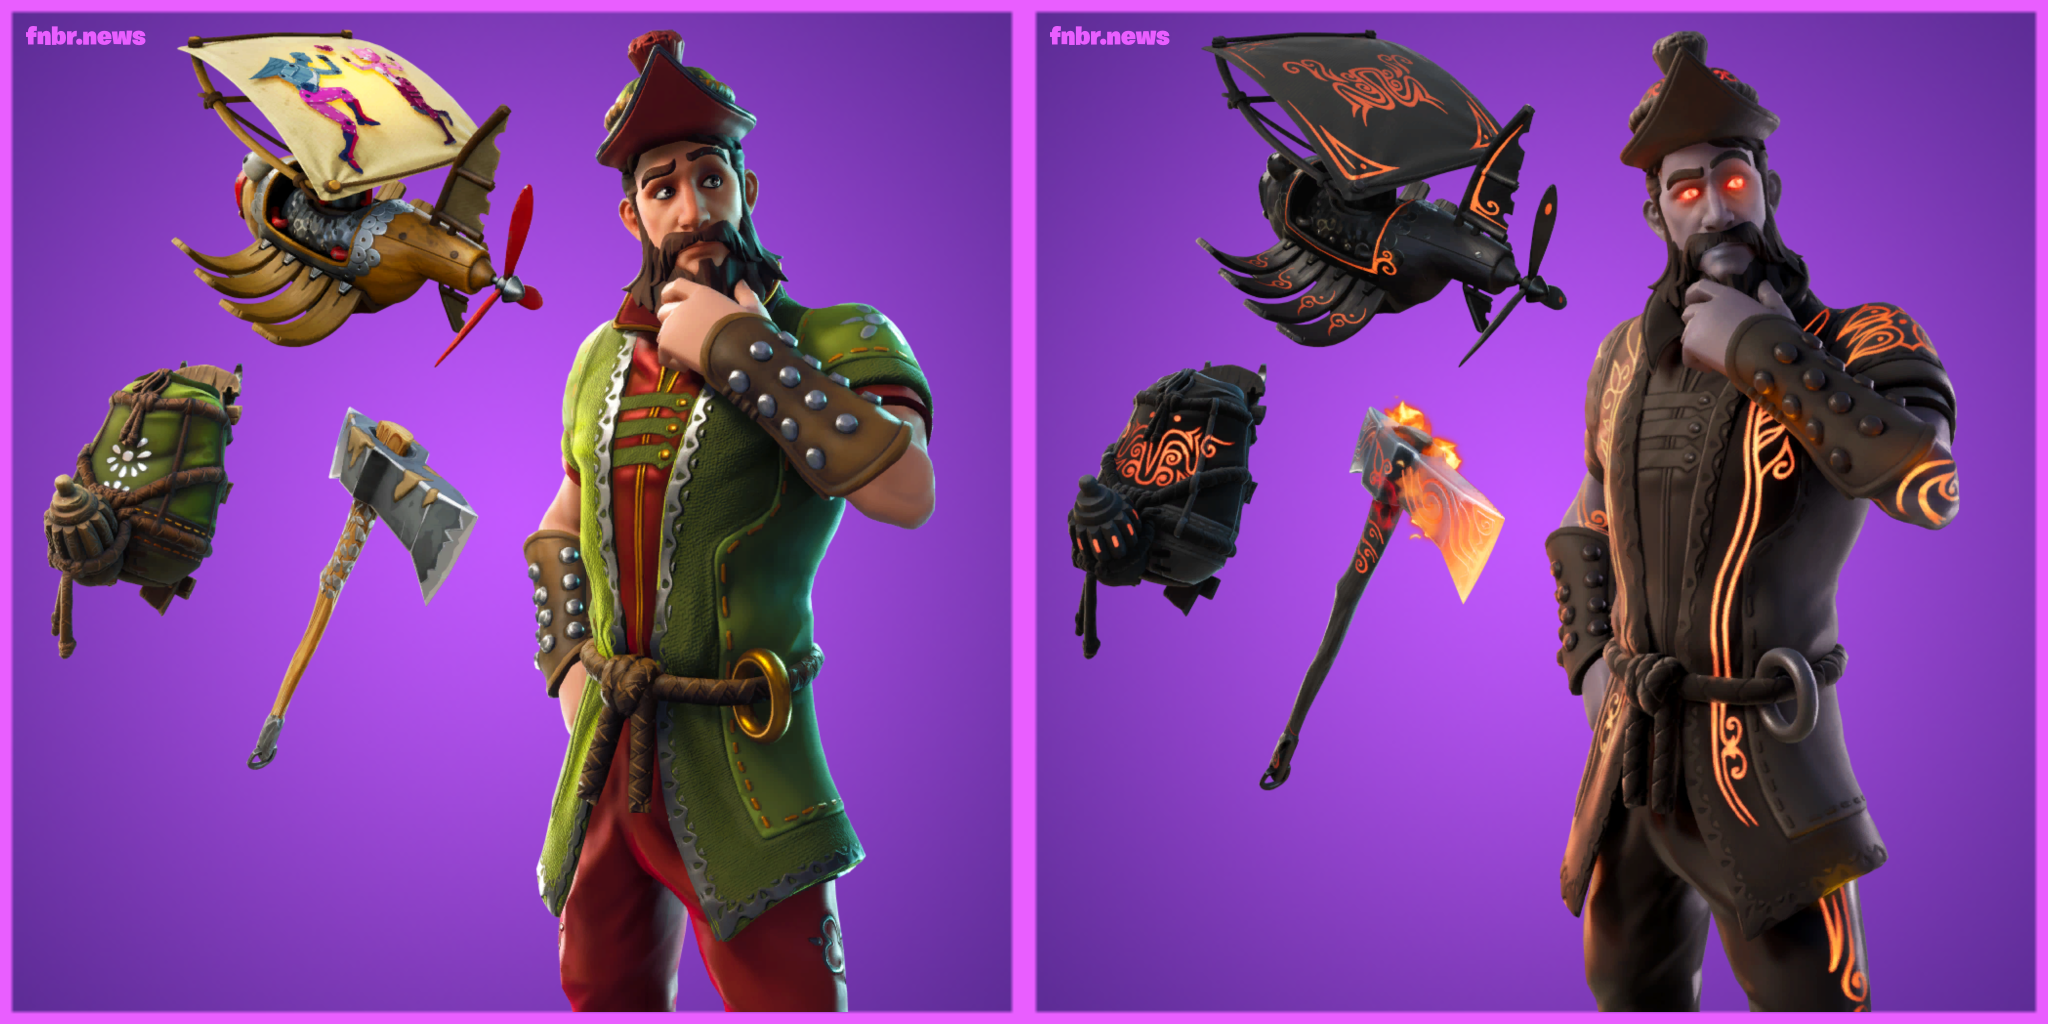 Fortnite's Rarest Item Shop Outfit to return tonight